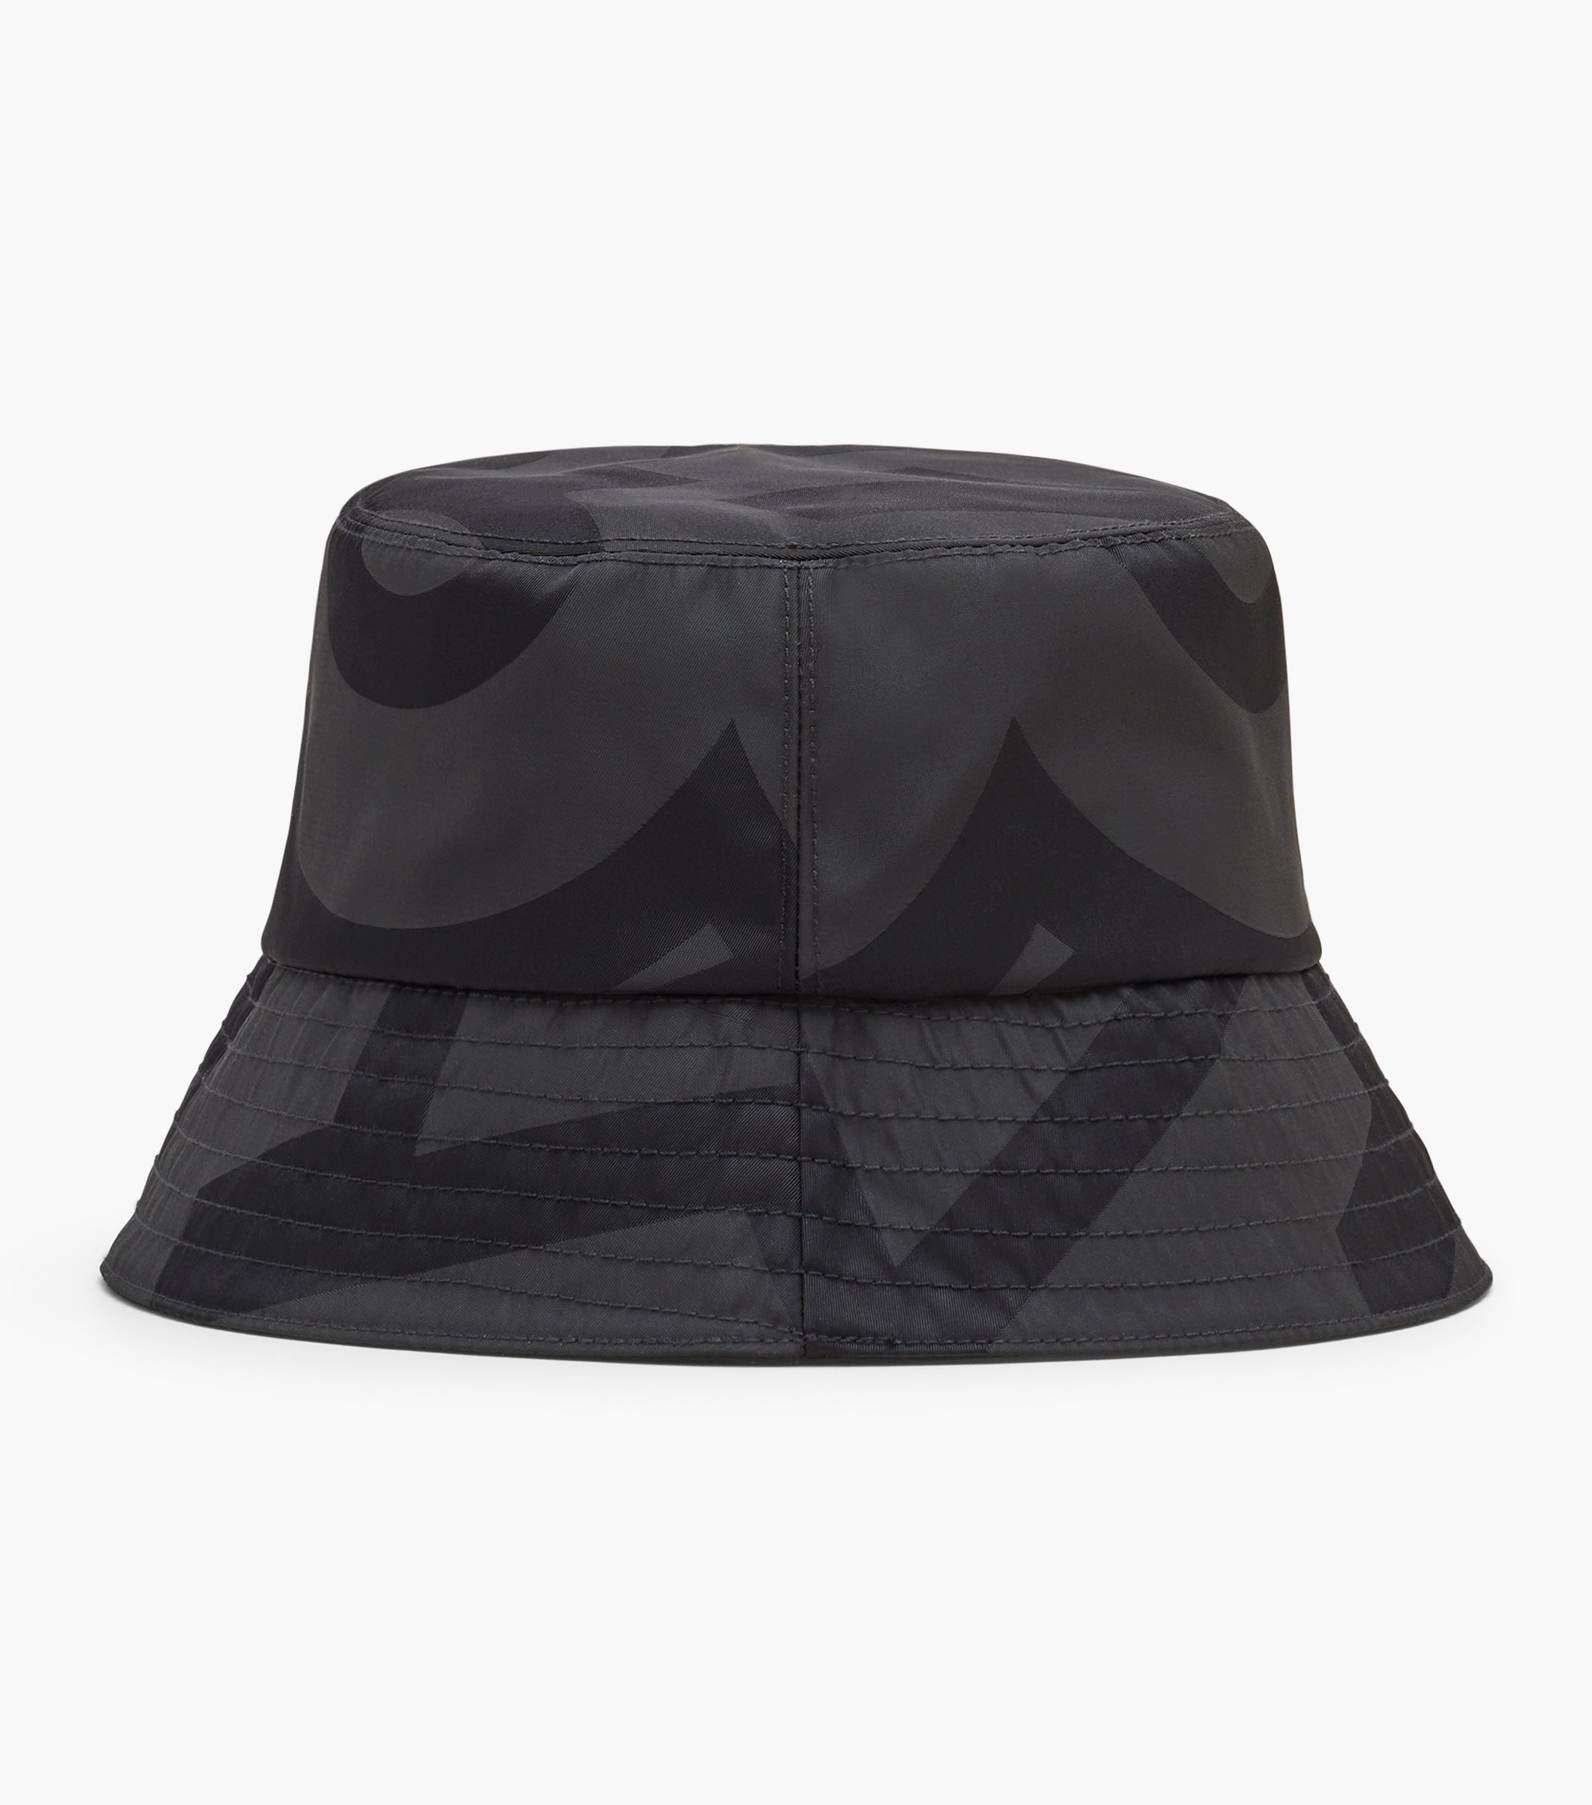 Designer Nylon Popular Bucket Hats For Women Classic Fashion Accessory For  Autumn And Spring Ideal For Fishermen And Sun Protection Drop Ship  Available From Guhsz, $19.29